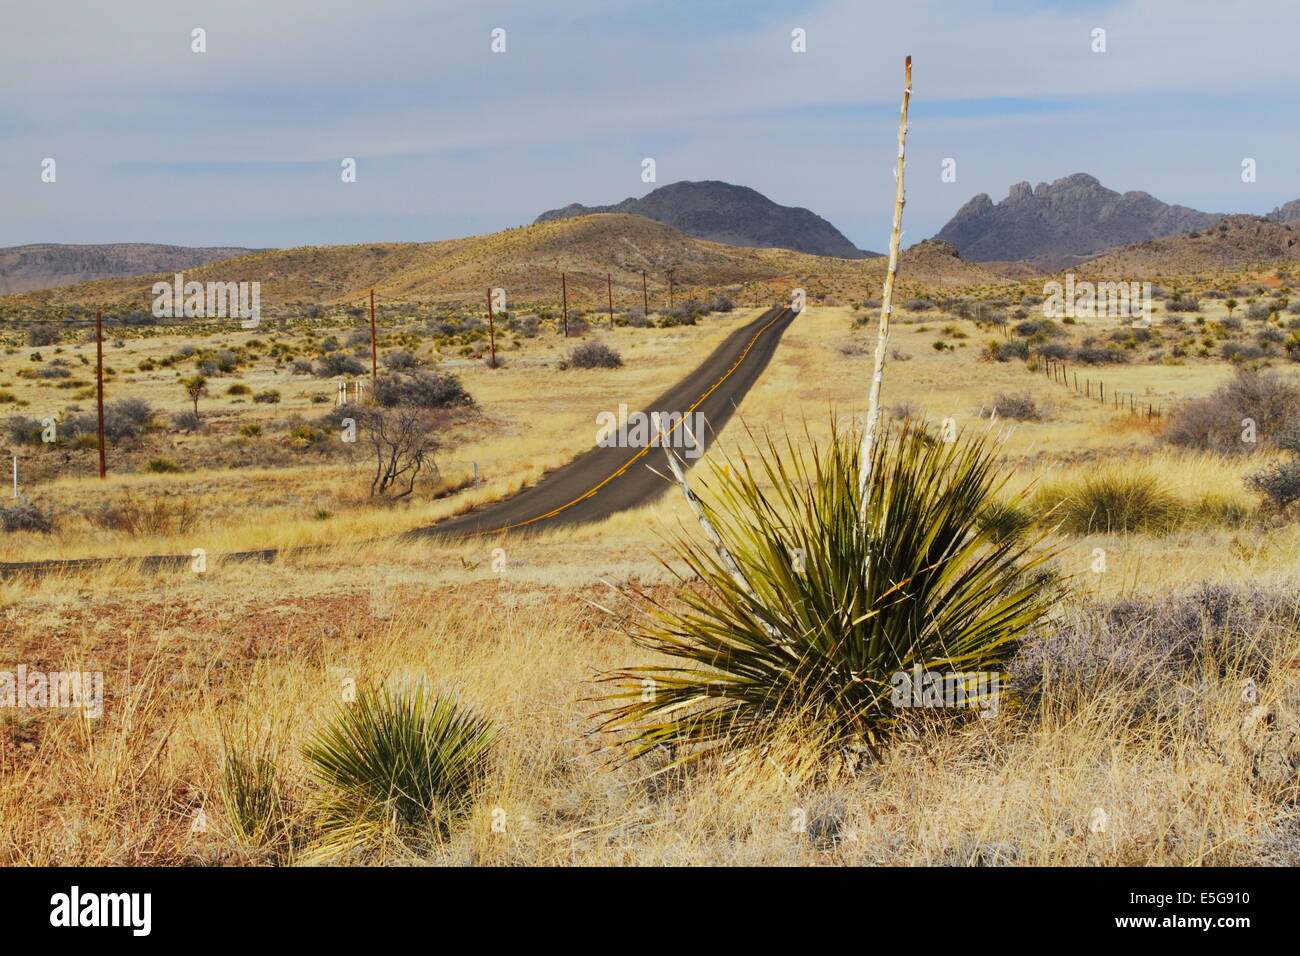 SH 166 cuts through the arid landscape of the Davis Mountains in West Texas, USA. Stock Photo